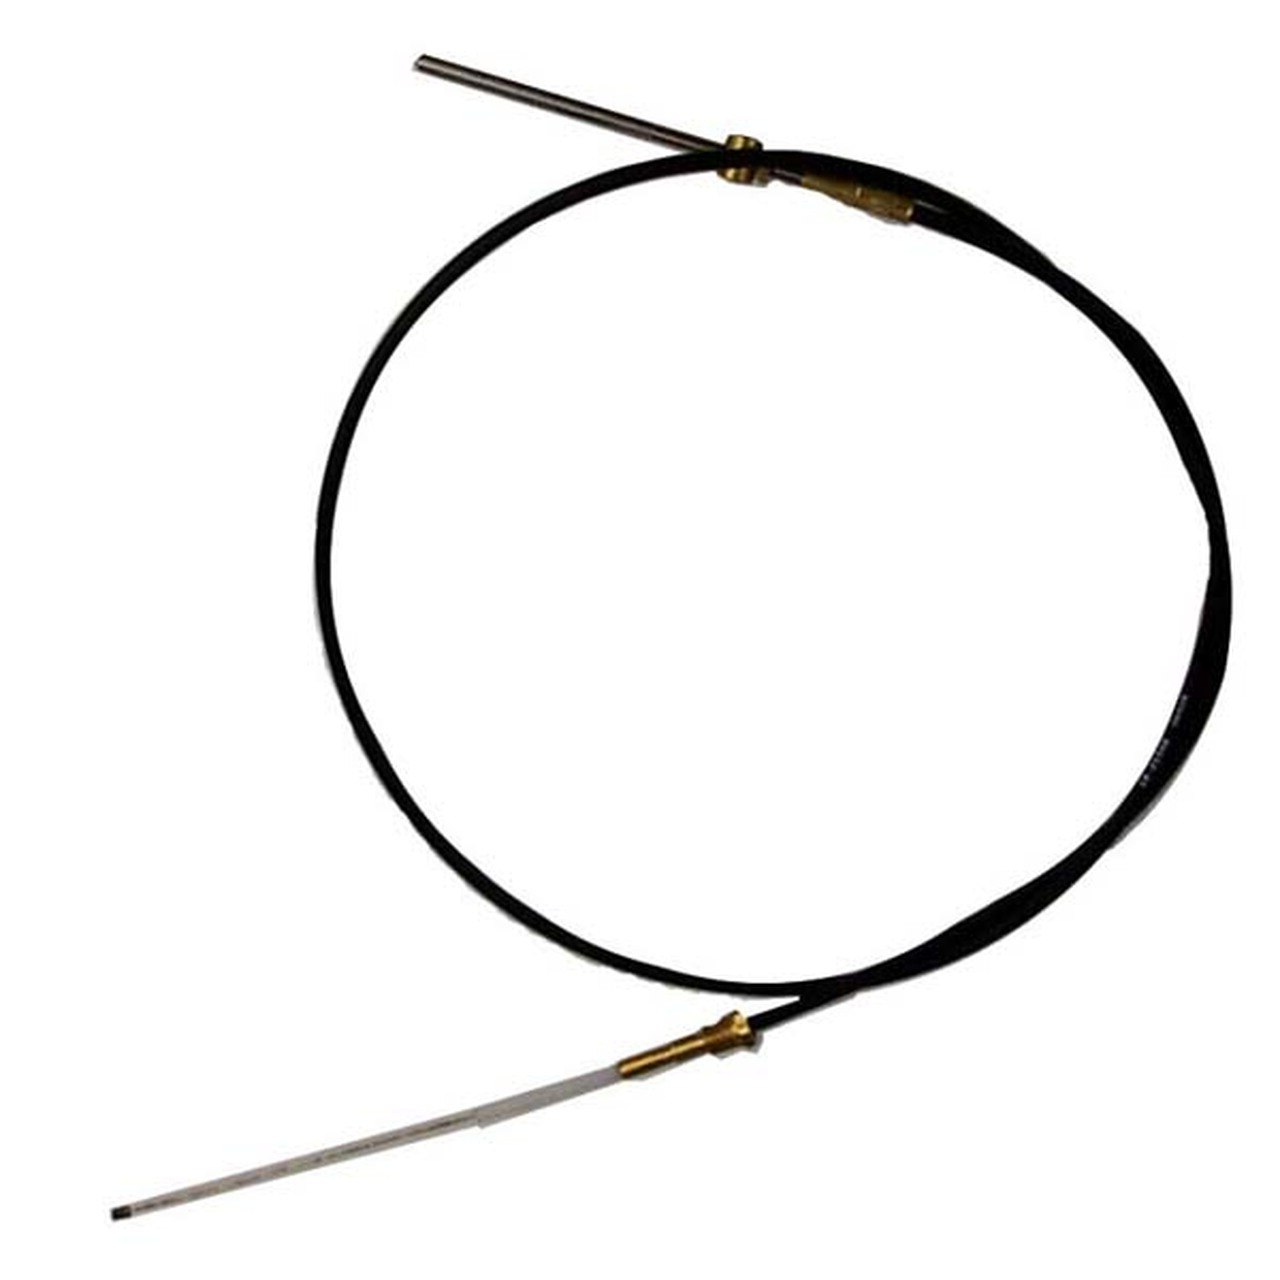 SHIFT CABLE ASSEMBLY